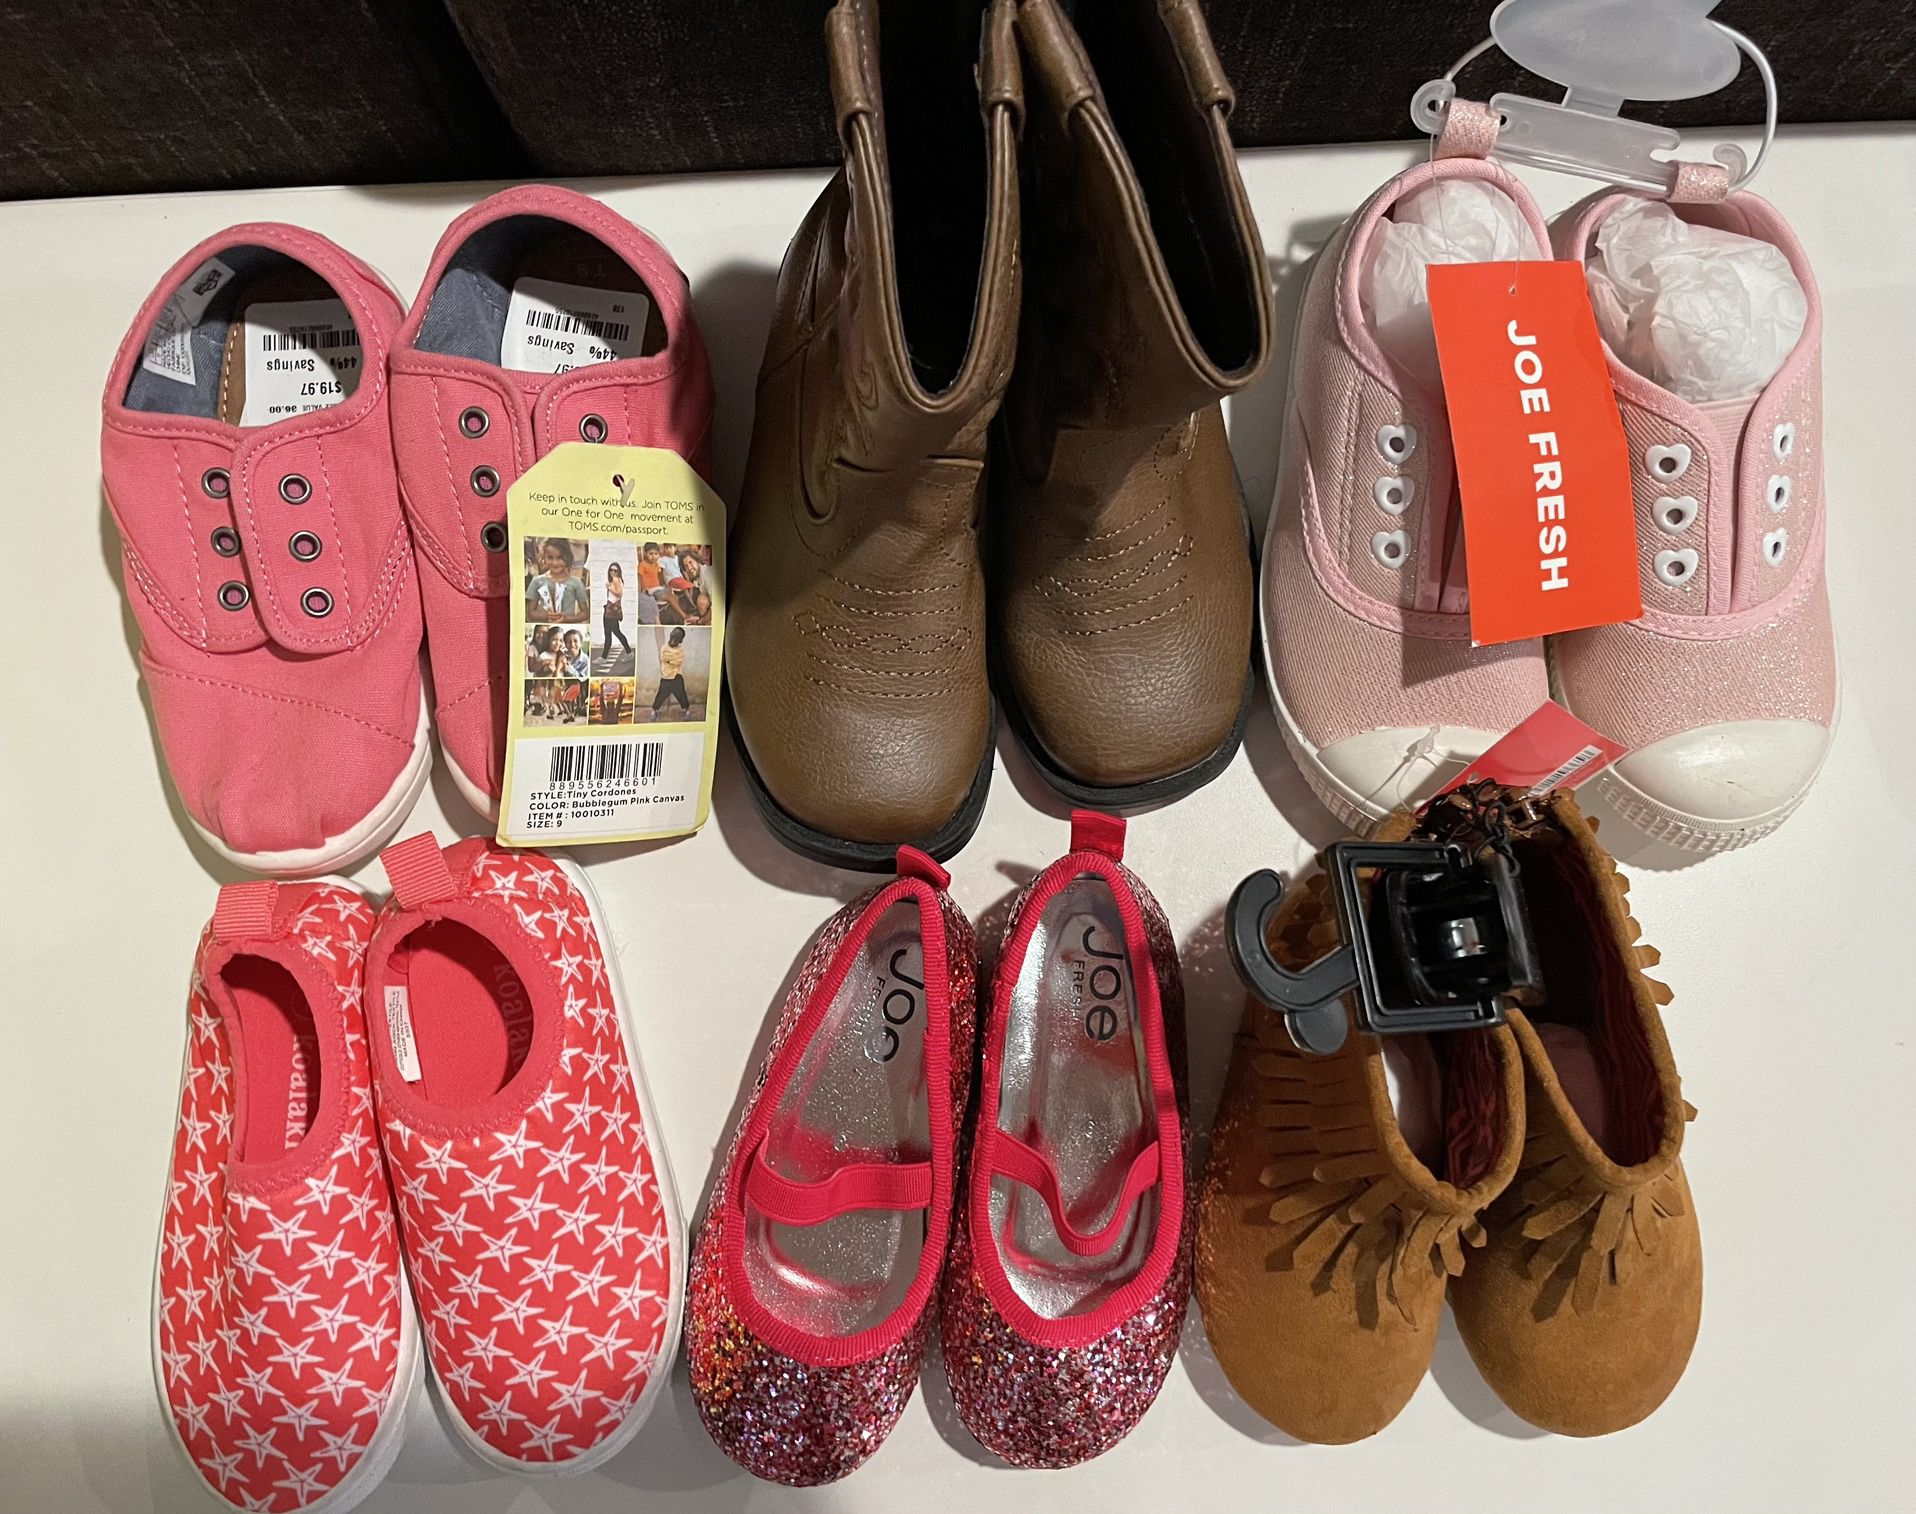 NEW! 6 Pairs Size 9 Girls Footwear 